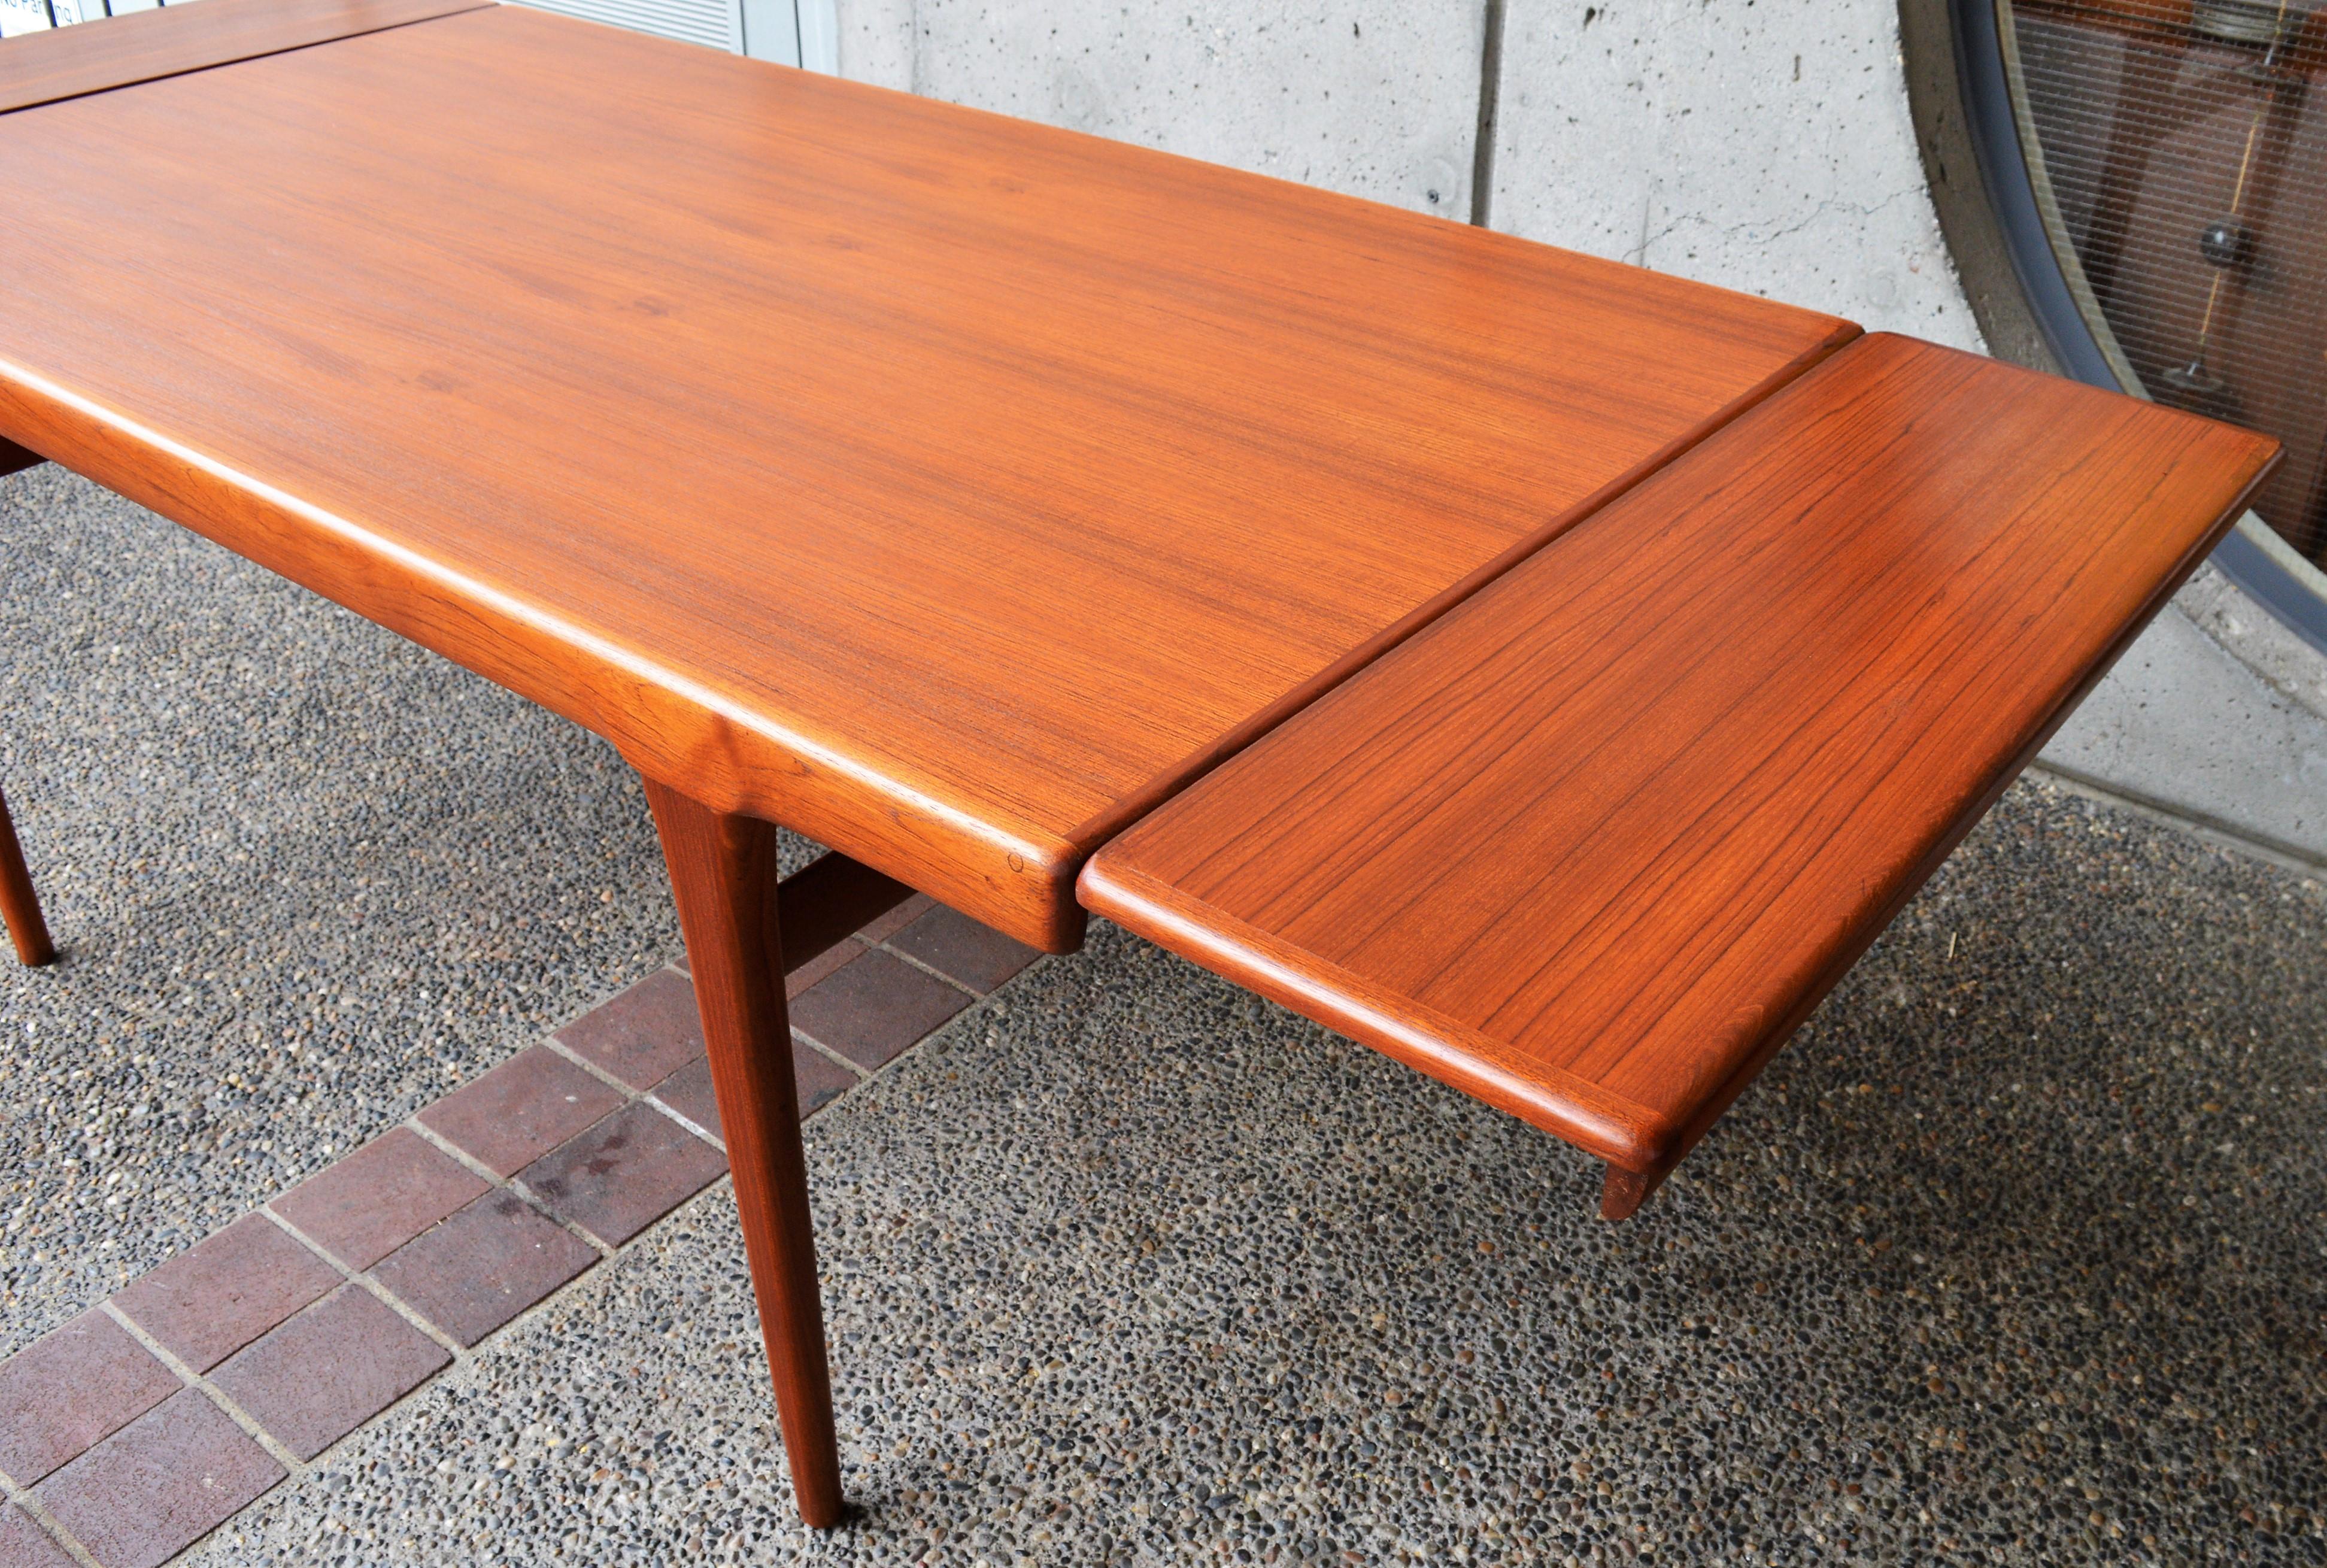 Danish Teak Two-Leaf Dining Table by Kofod Larsen with His Iconic Leg Detail 8